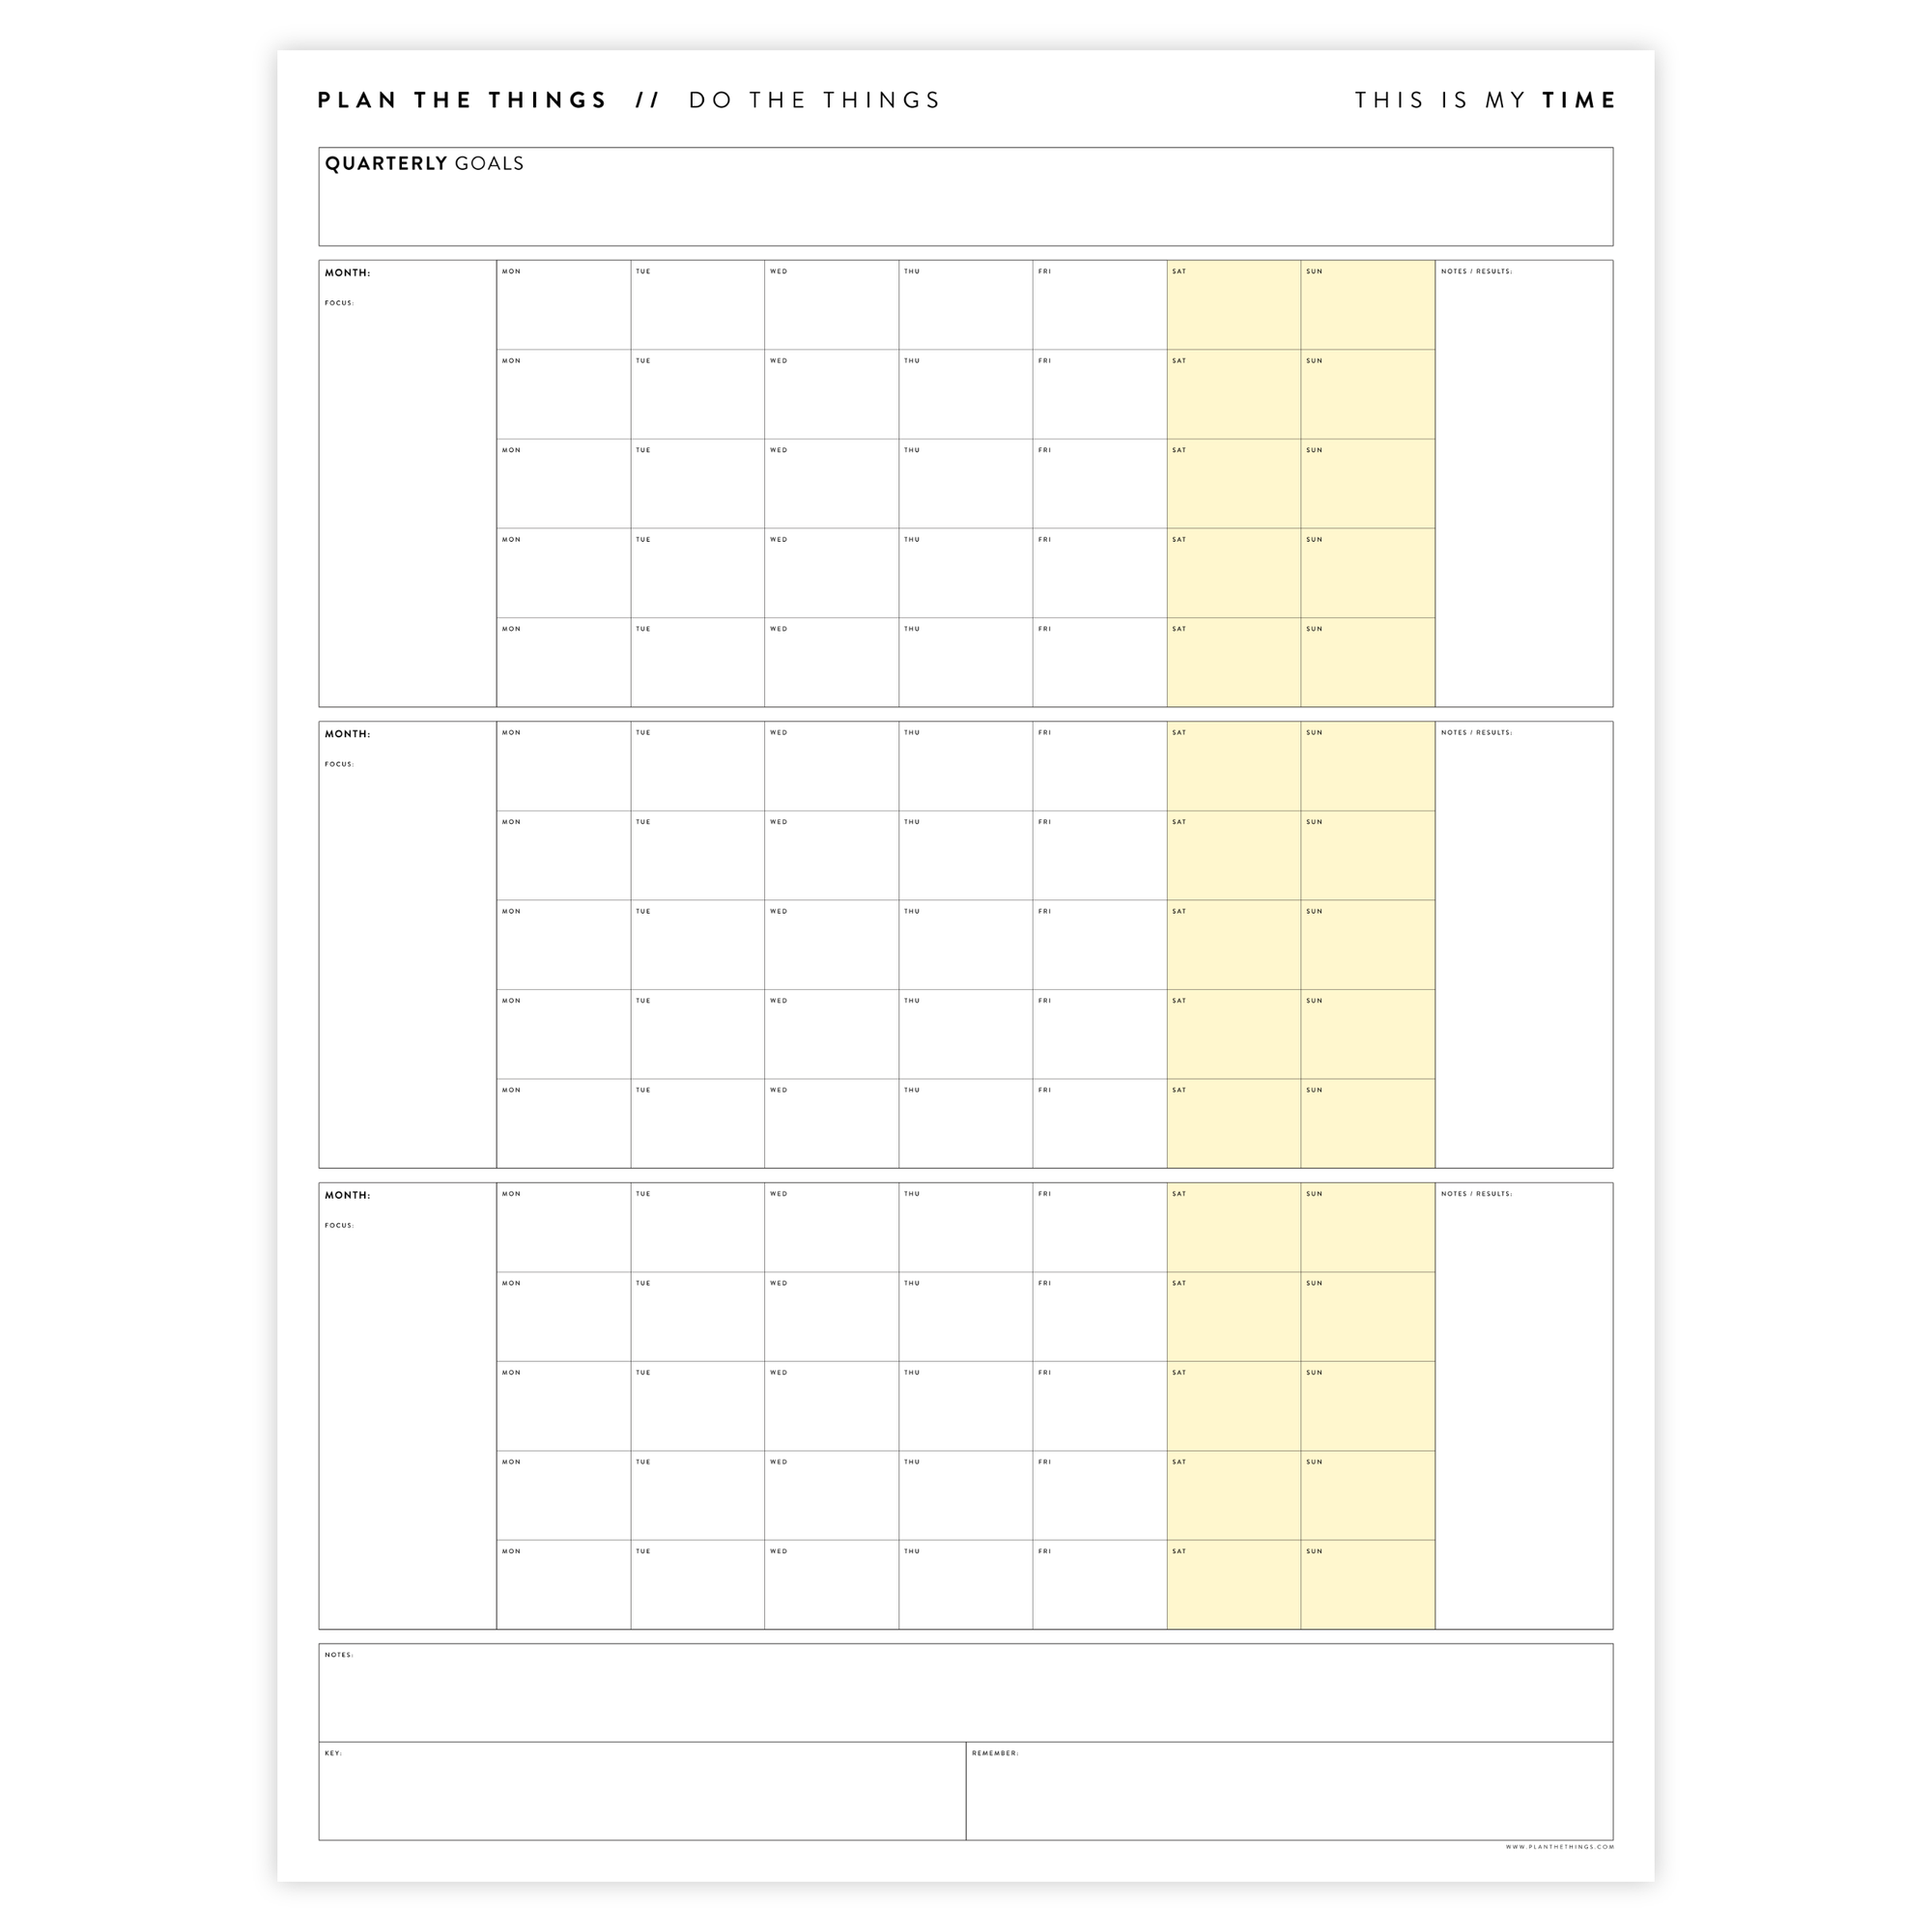 PRINTABLE UNDATED QUARTERLY WALL CALENDAR - MONDAY START - YELLOW WEEKENDS - INSTANT DOWNLOAD